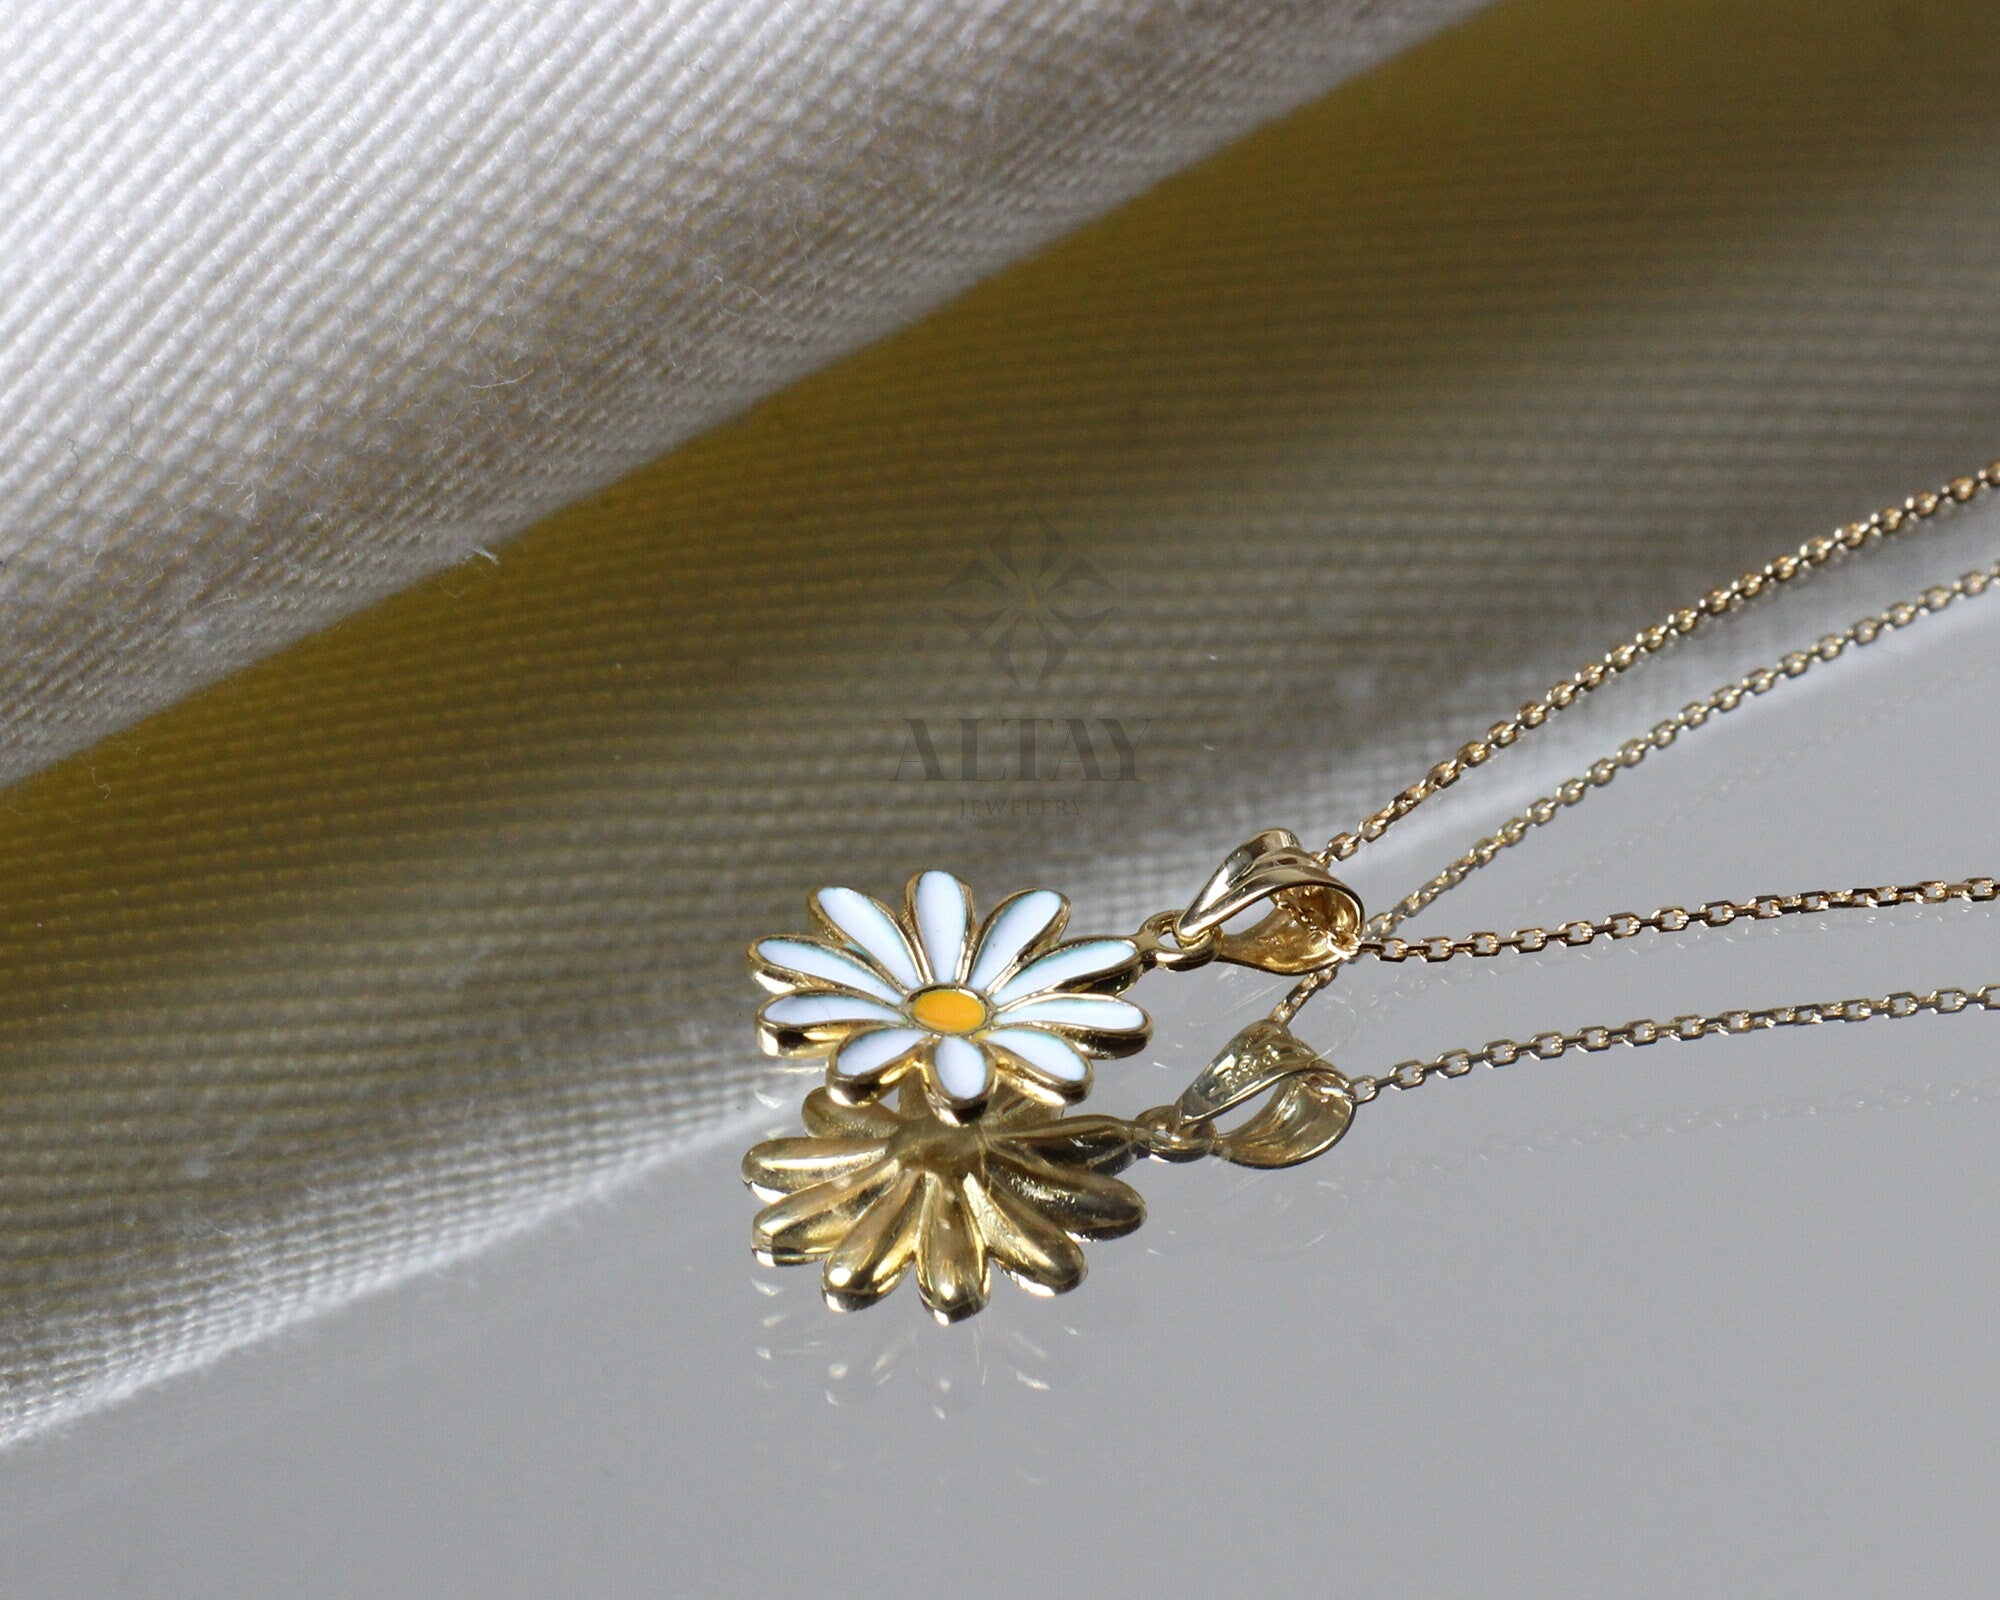 14K Gold Daisy Necklace, Gold Flower Pendant, Yellow and White Enamel Choker, Gift for Her, Daisy Charm, Dainty Everyday Daisy Jewelry